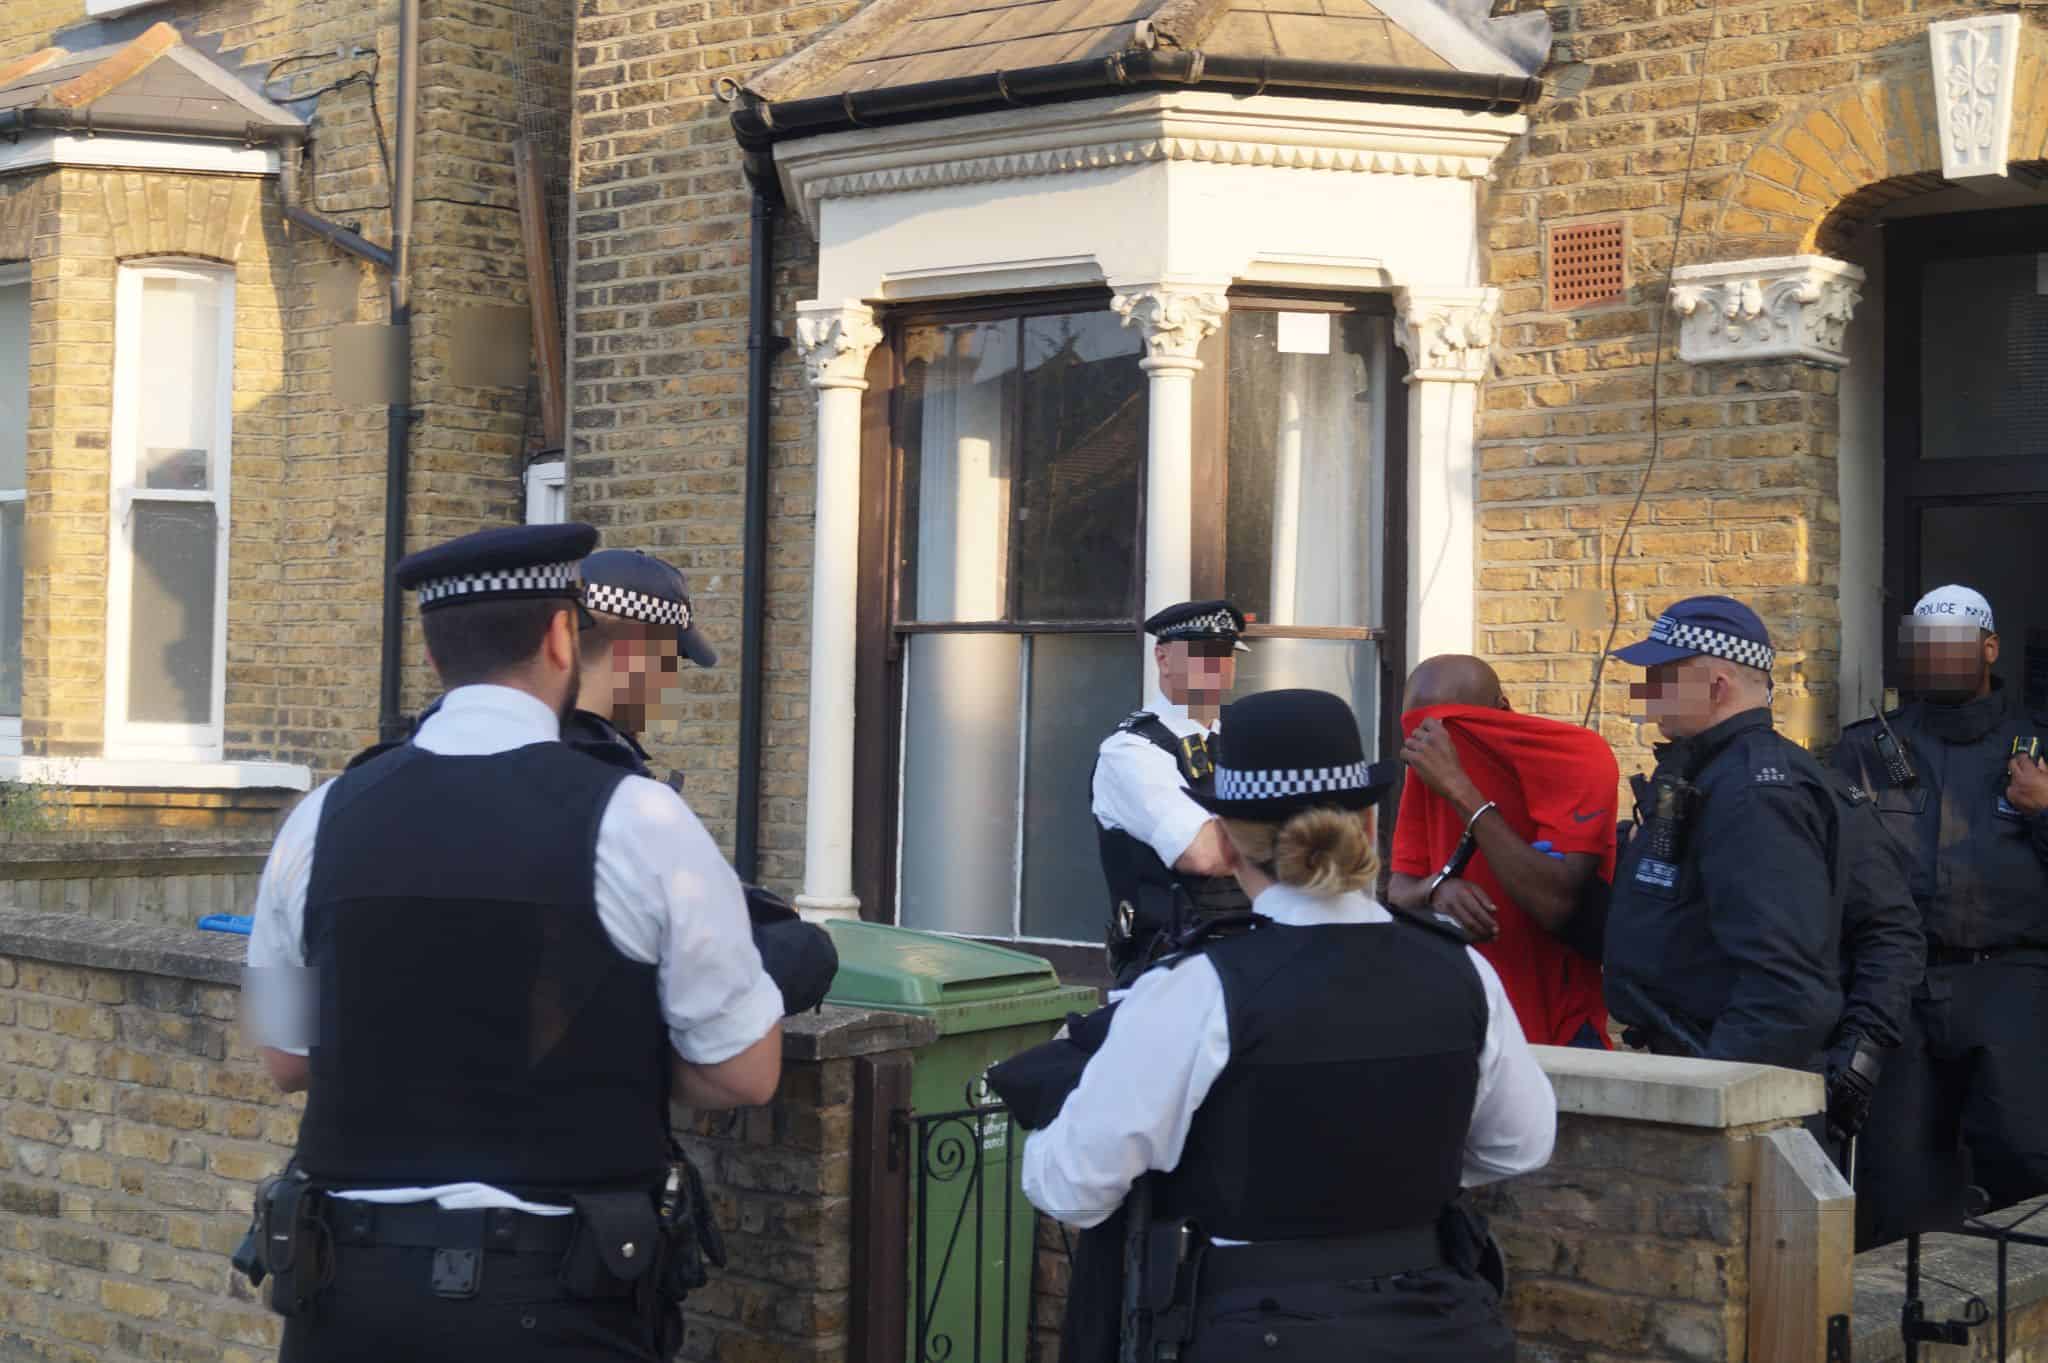 One of the suspects being arrested in Peckham